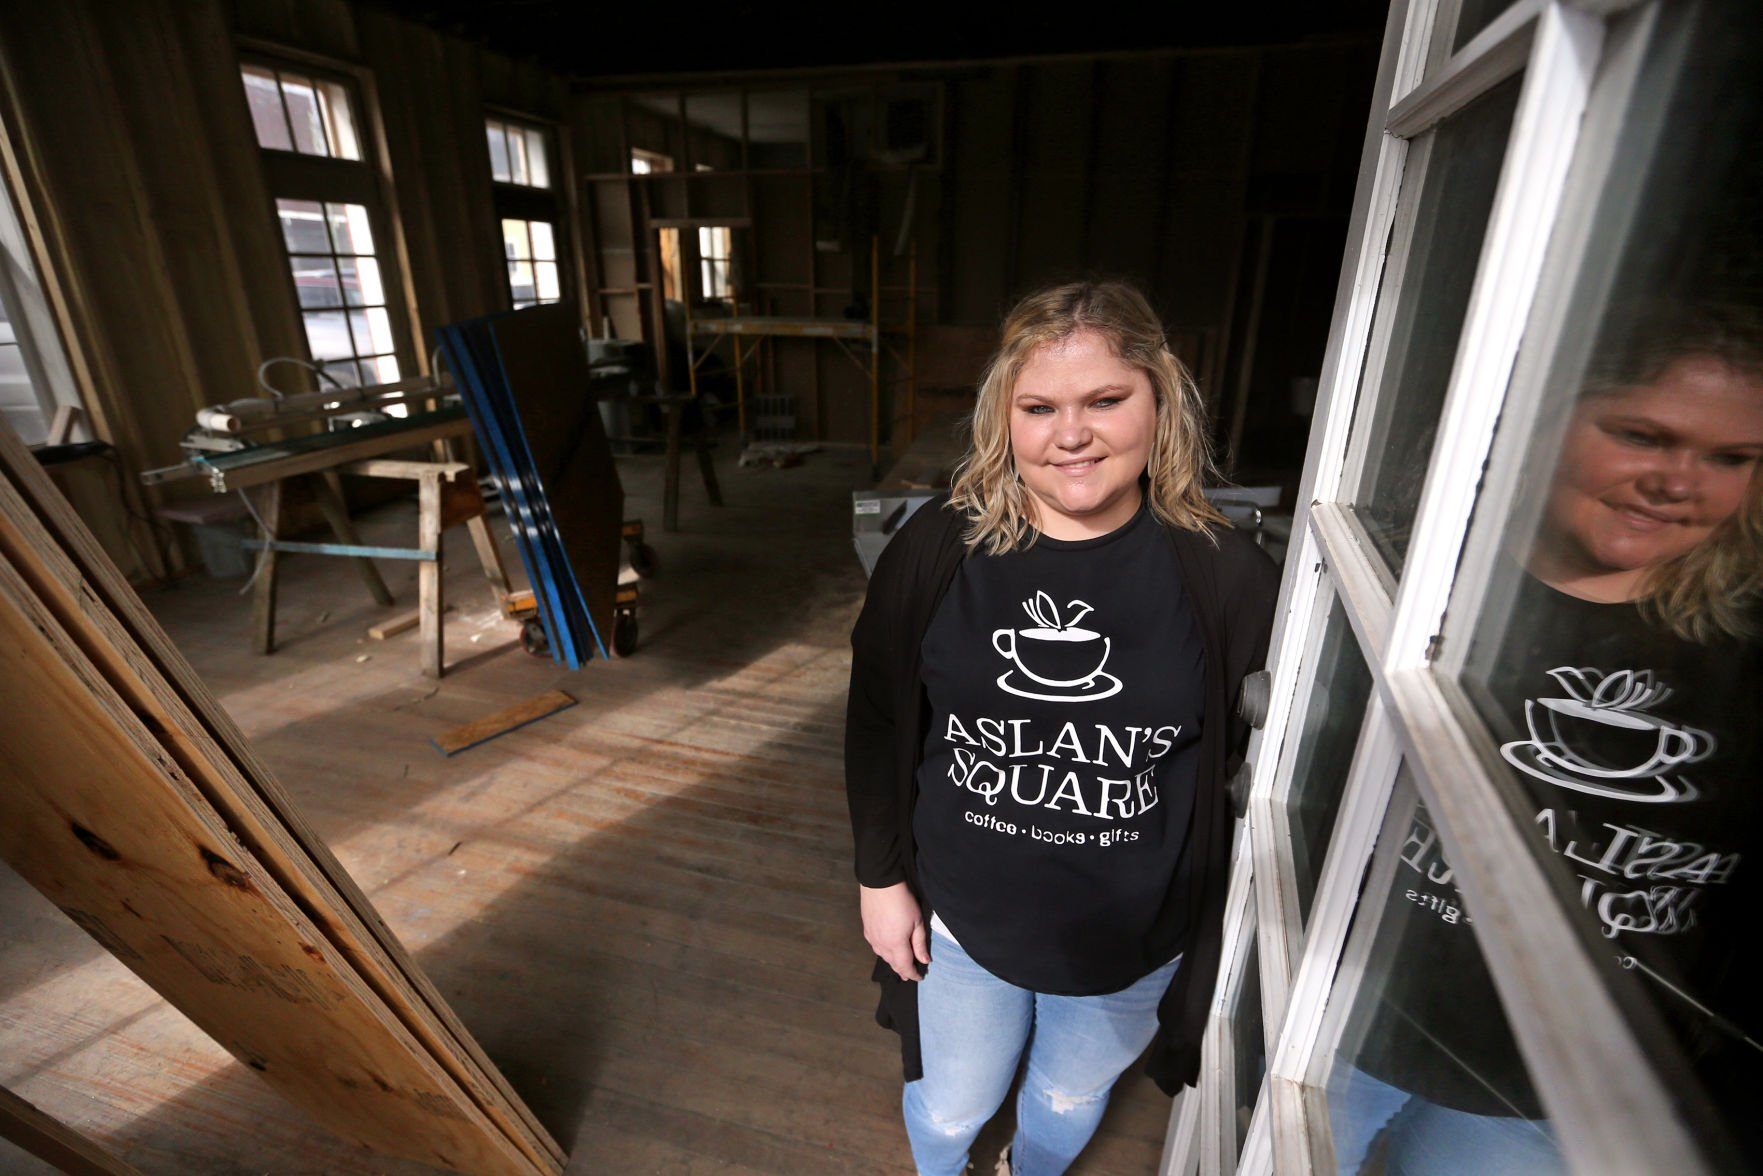 Owner Jacey Stanbro stands at Aslan’s Square in Dyersville, Iowa, on Wednesday. The new business will feature a bookstore, coffee shop and gift store, and it is expected to open this summer.    PHOTO CREDIT: JESSICA REILLY